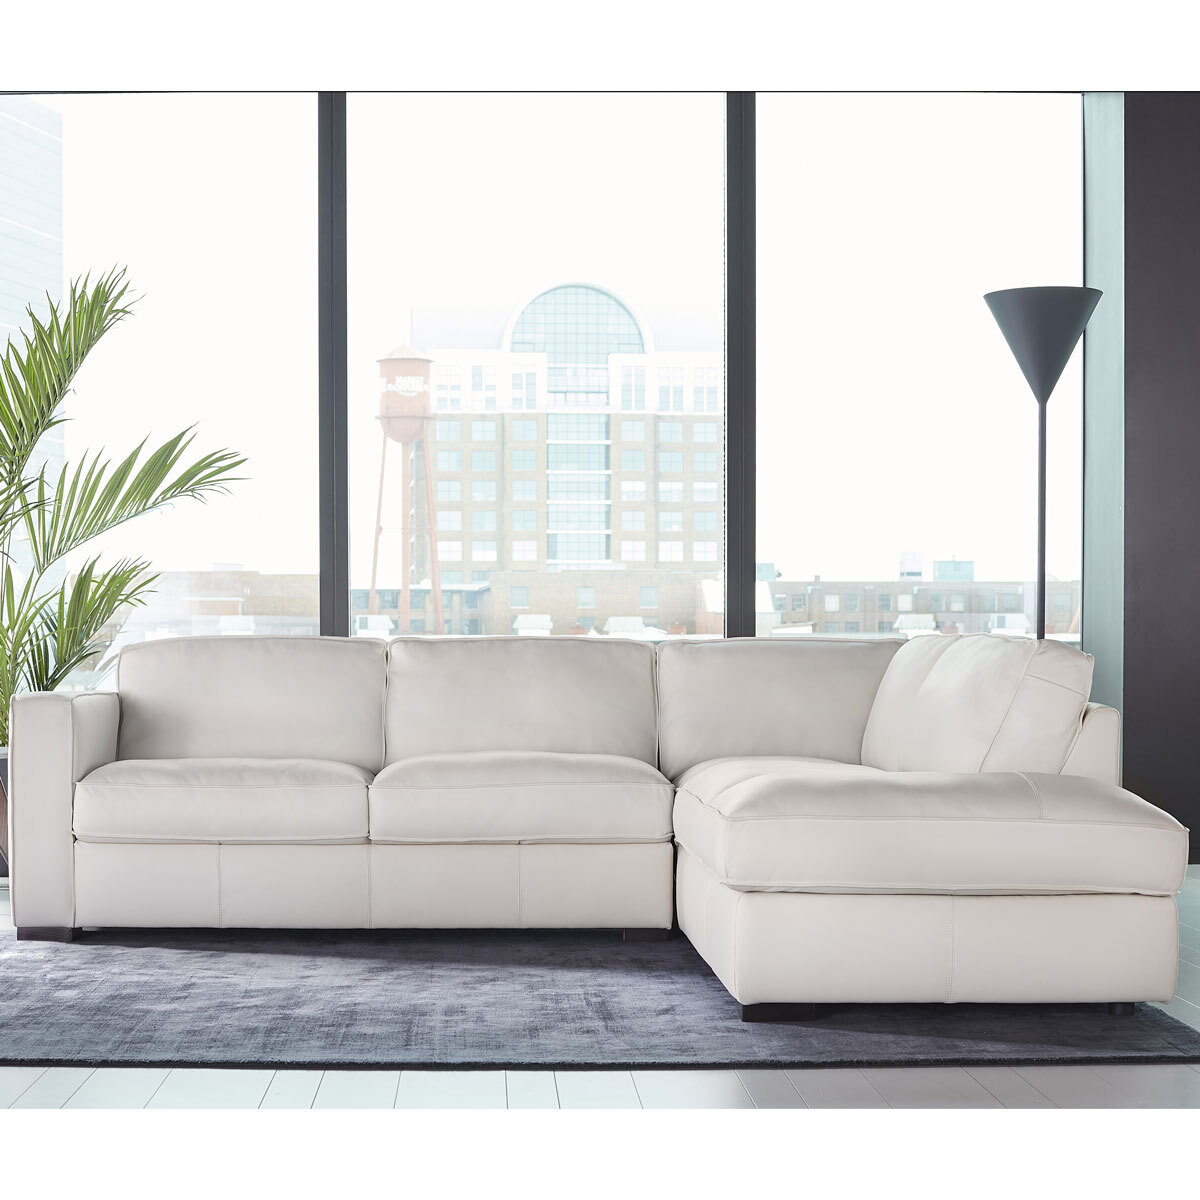 Natuzzigroup Cream Leather Sectional, Leather Sectional Sofa Costco